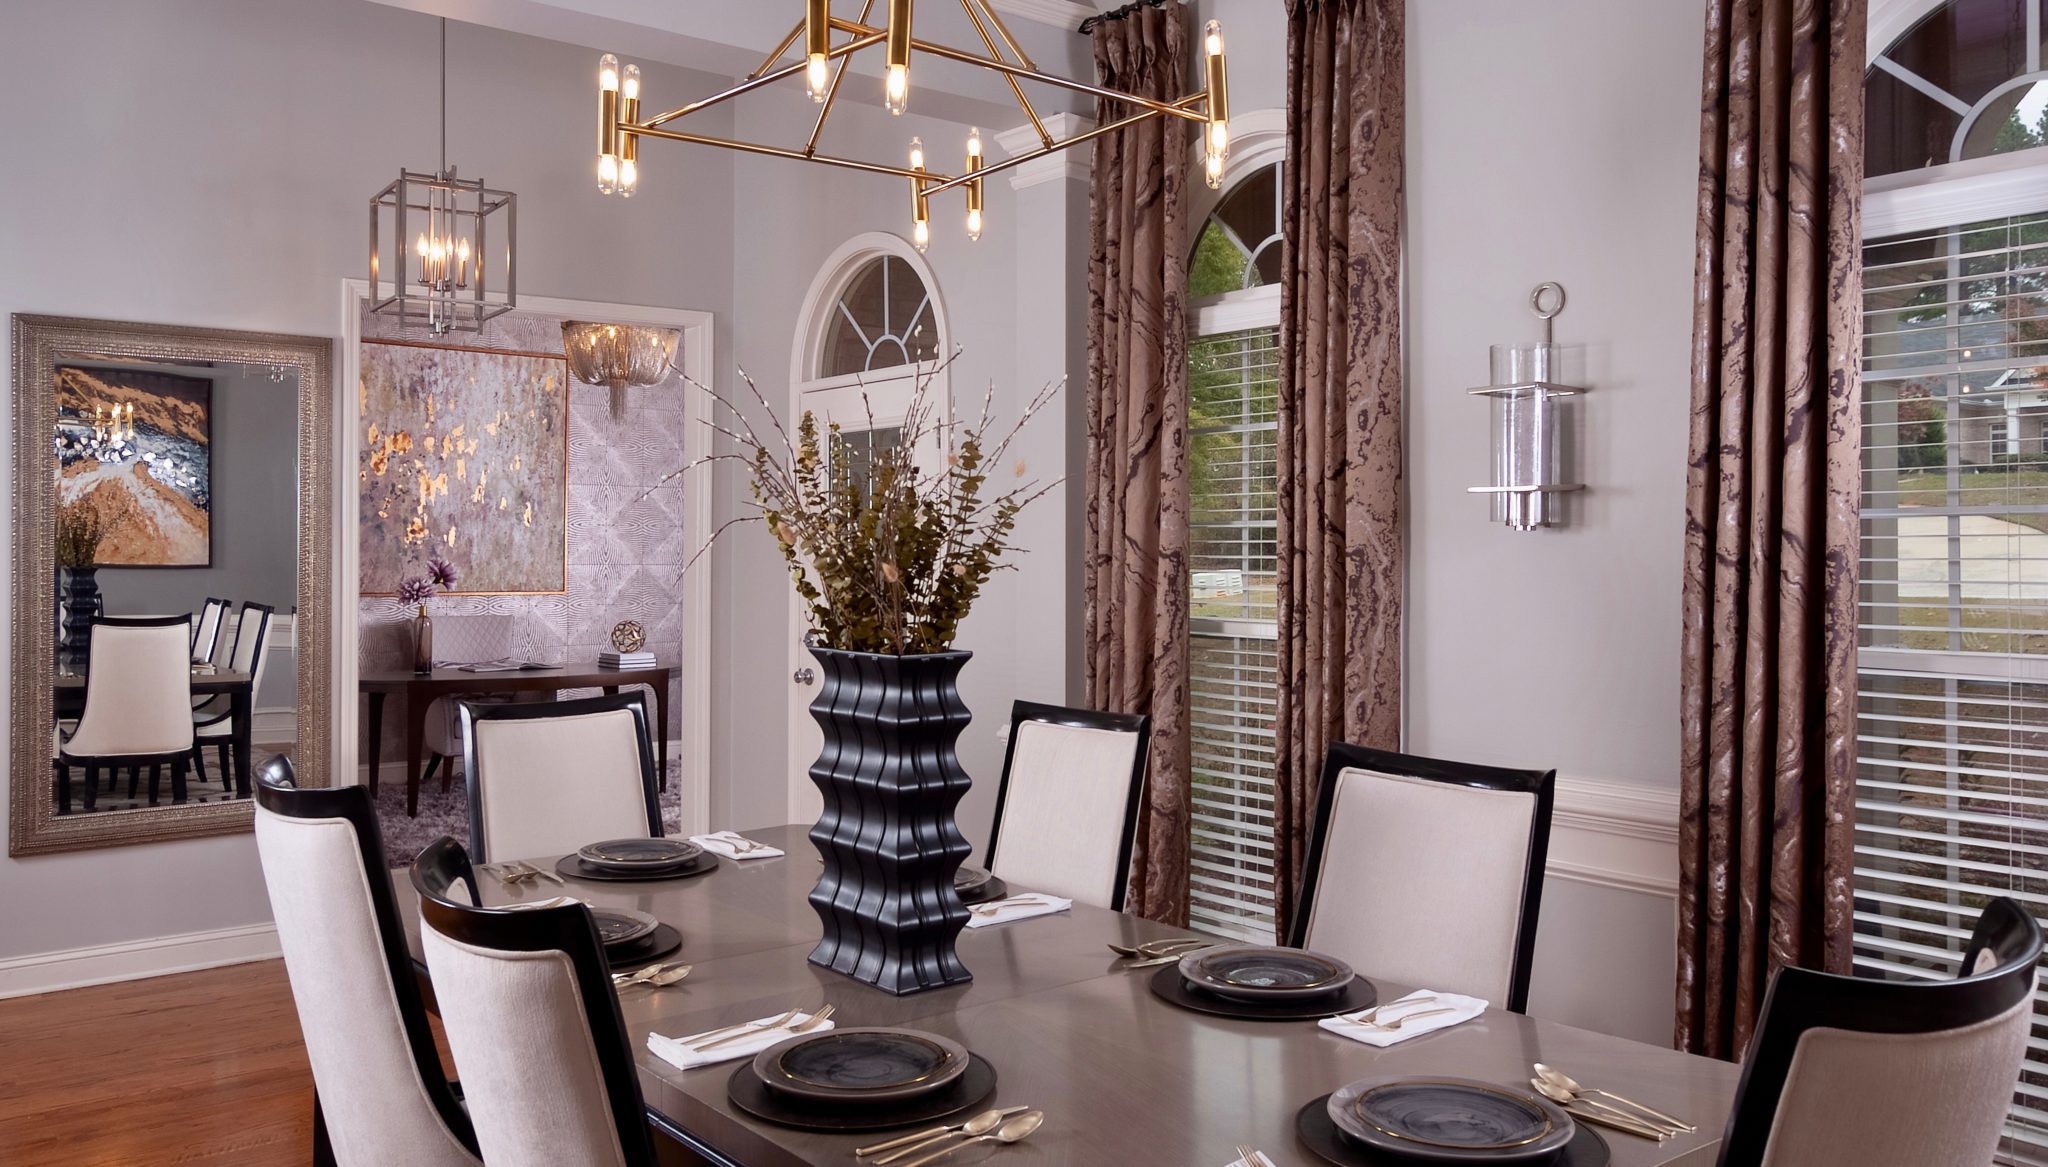 Incorporating mixed metals in your home decor